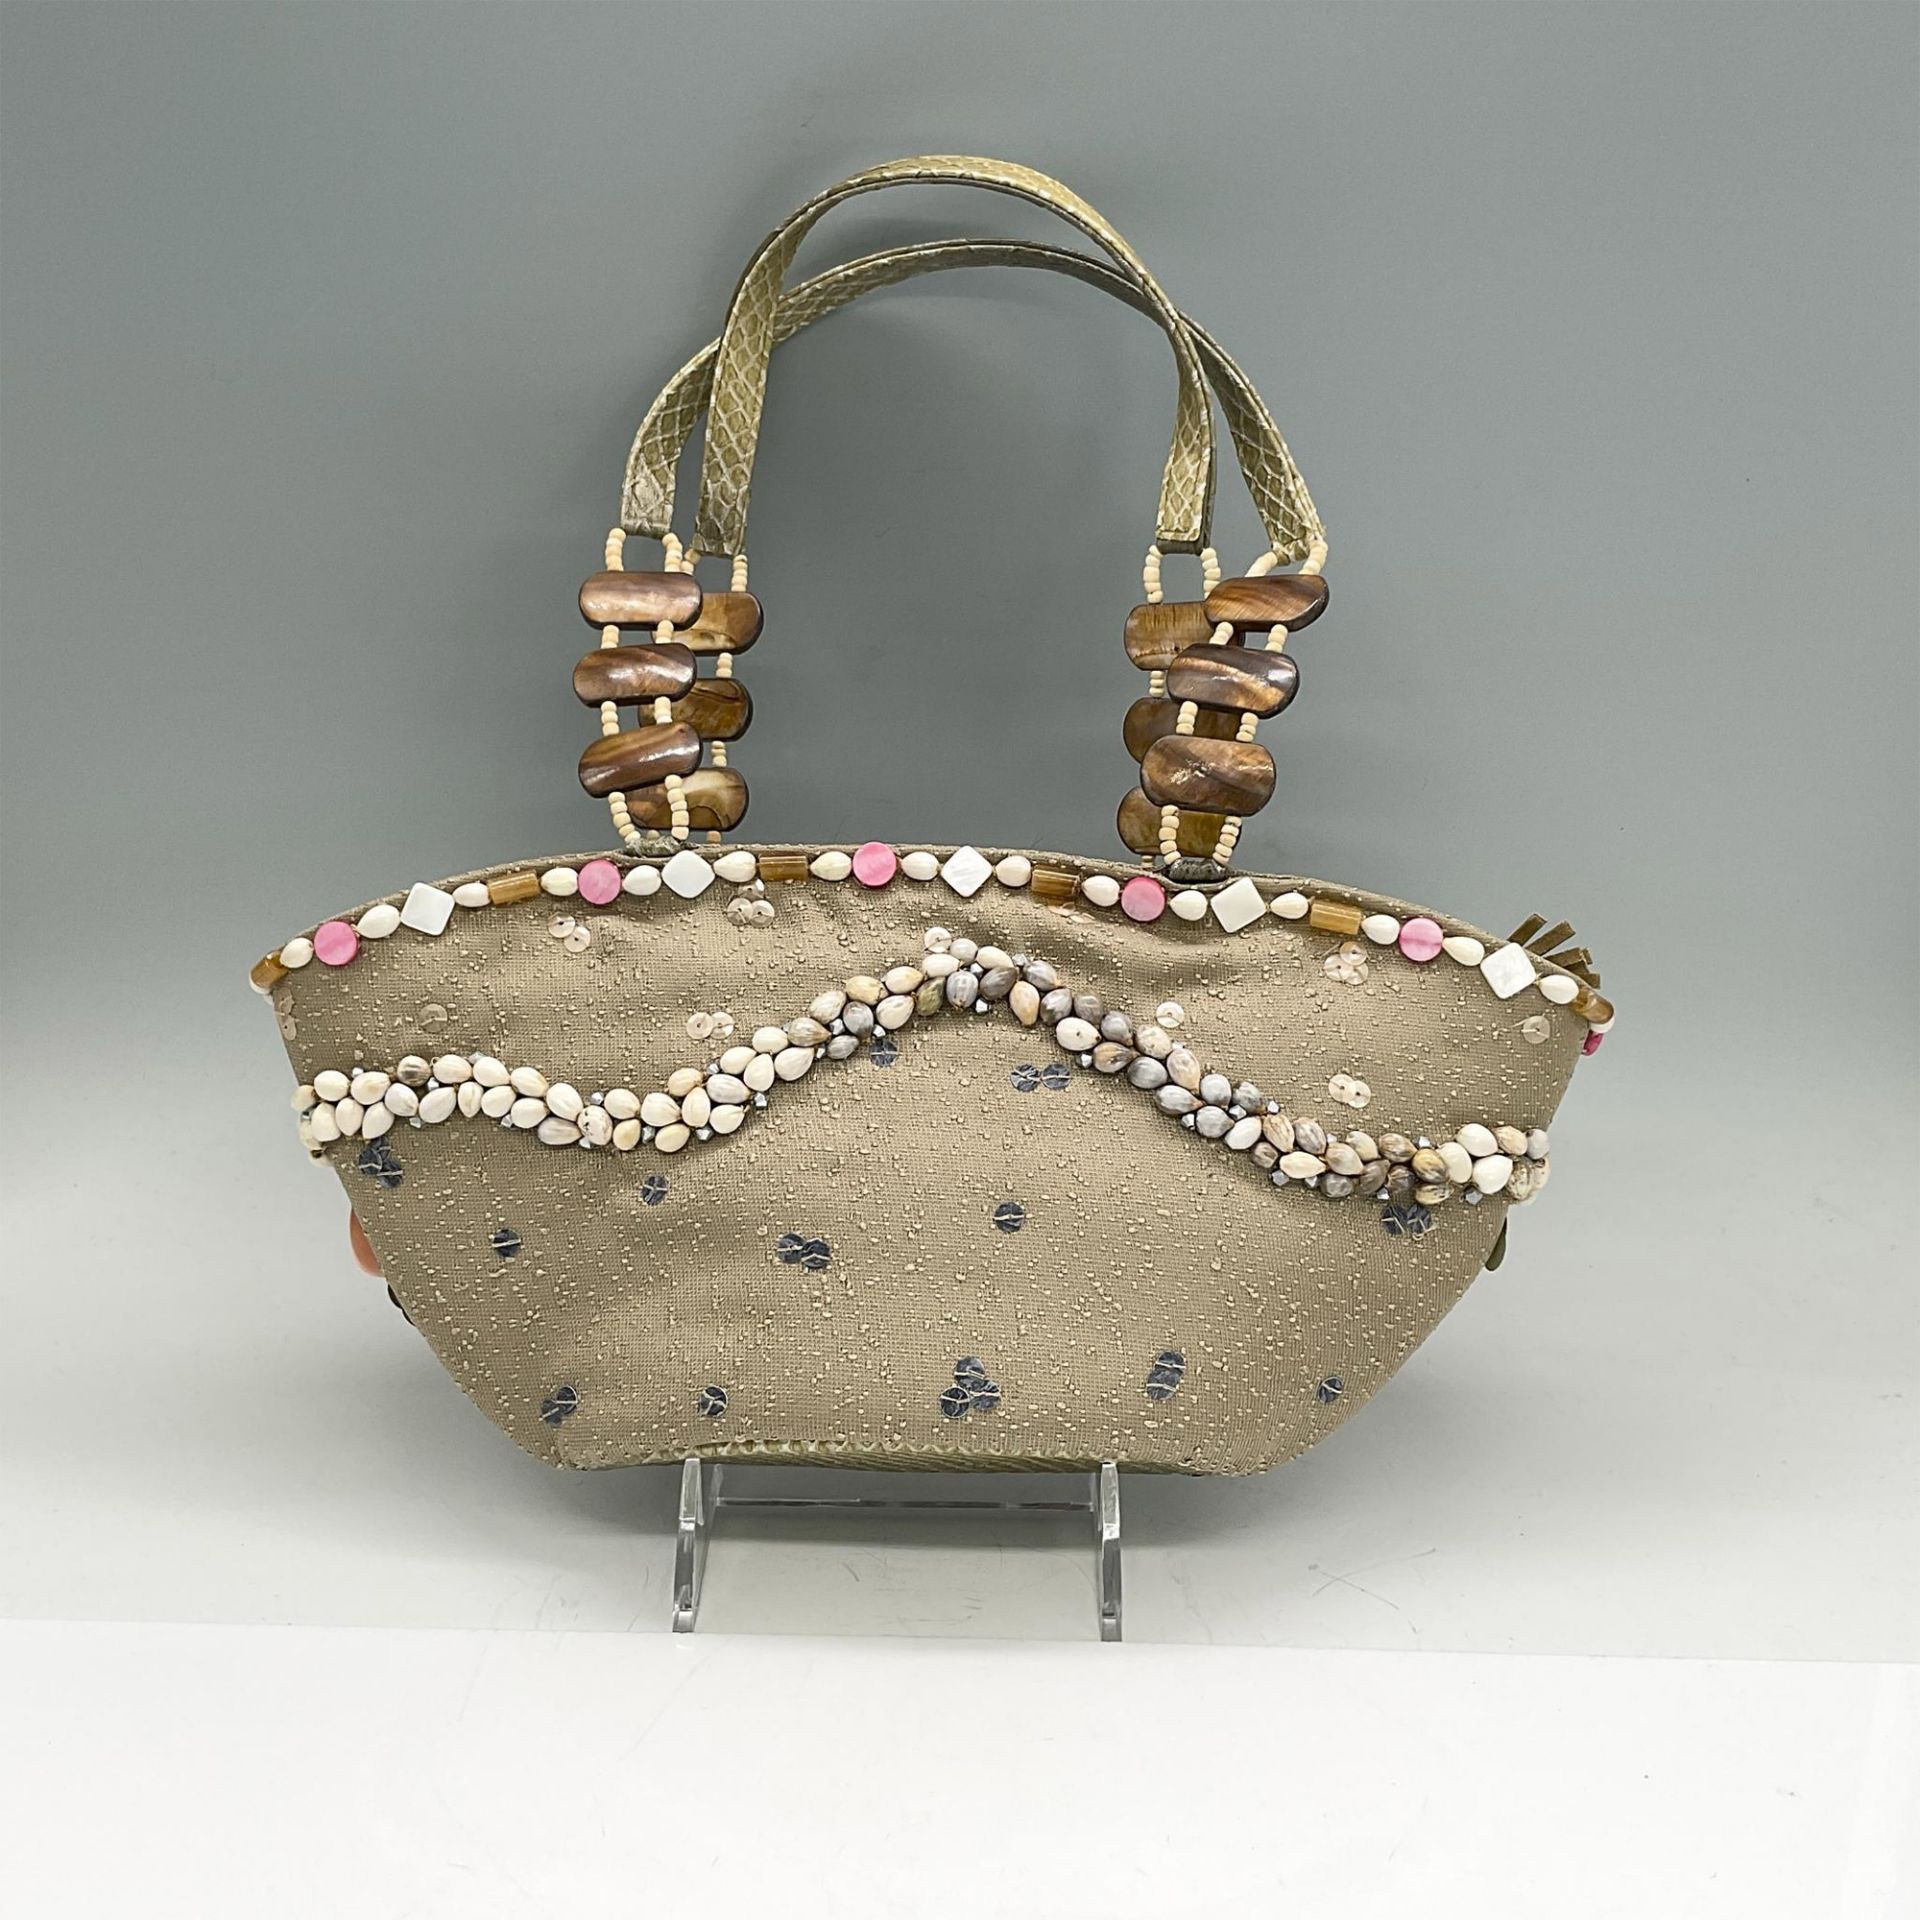 Mary Frances Fabric Handbag, Taupe With Multicolor Beads - Image 2 of 5